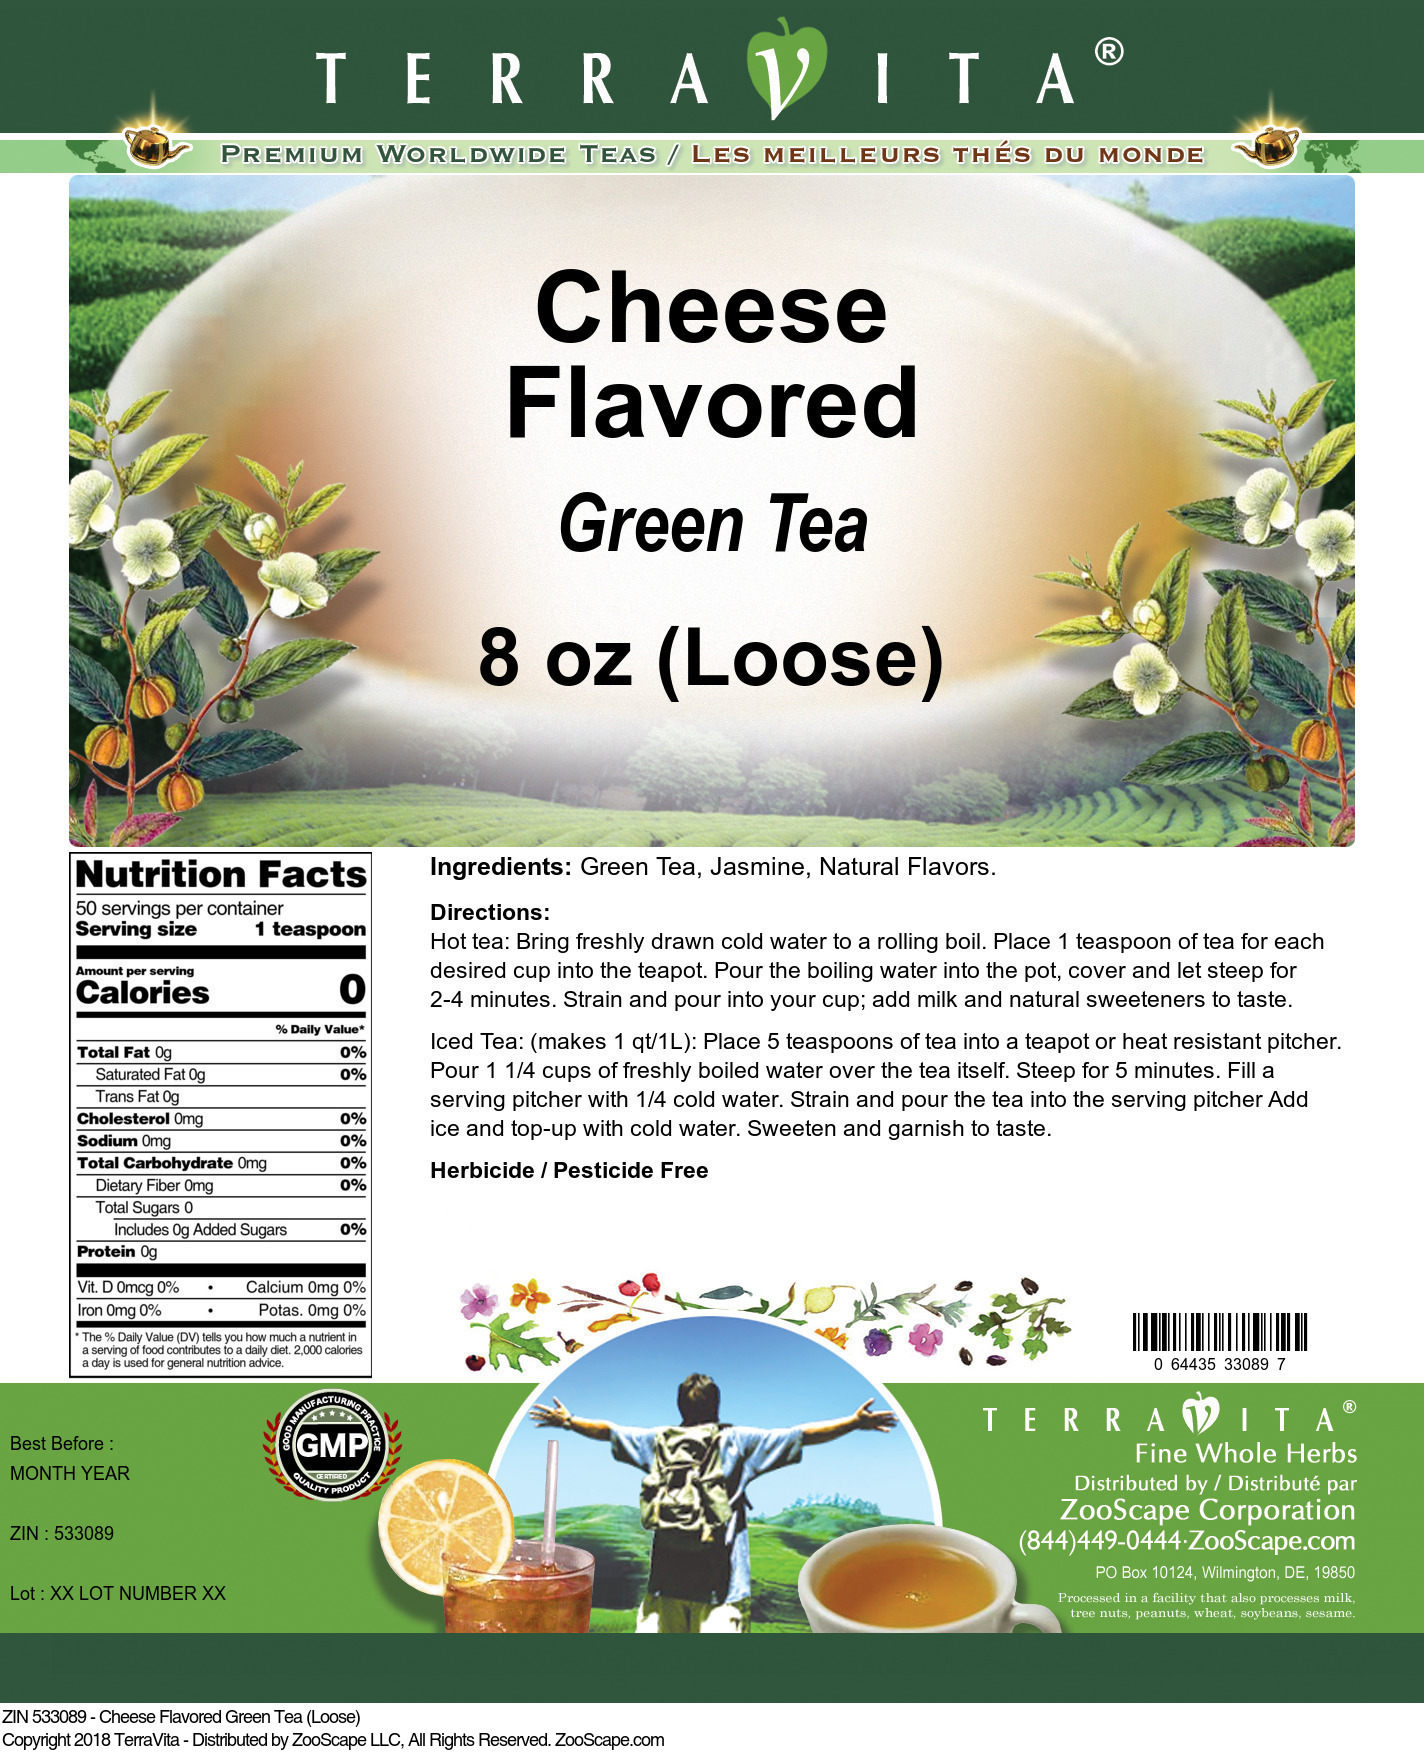 Cheese Flavored Green Tea (Loose) - Label